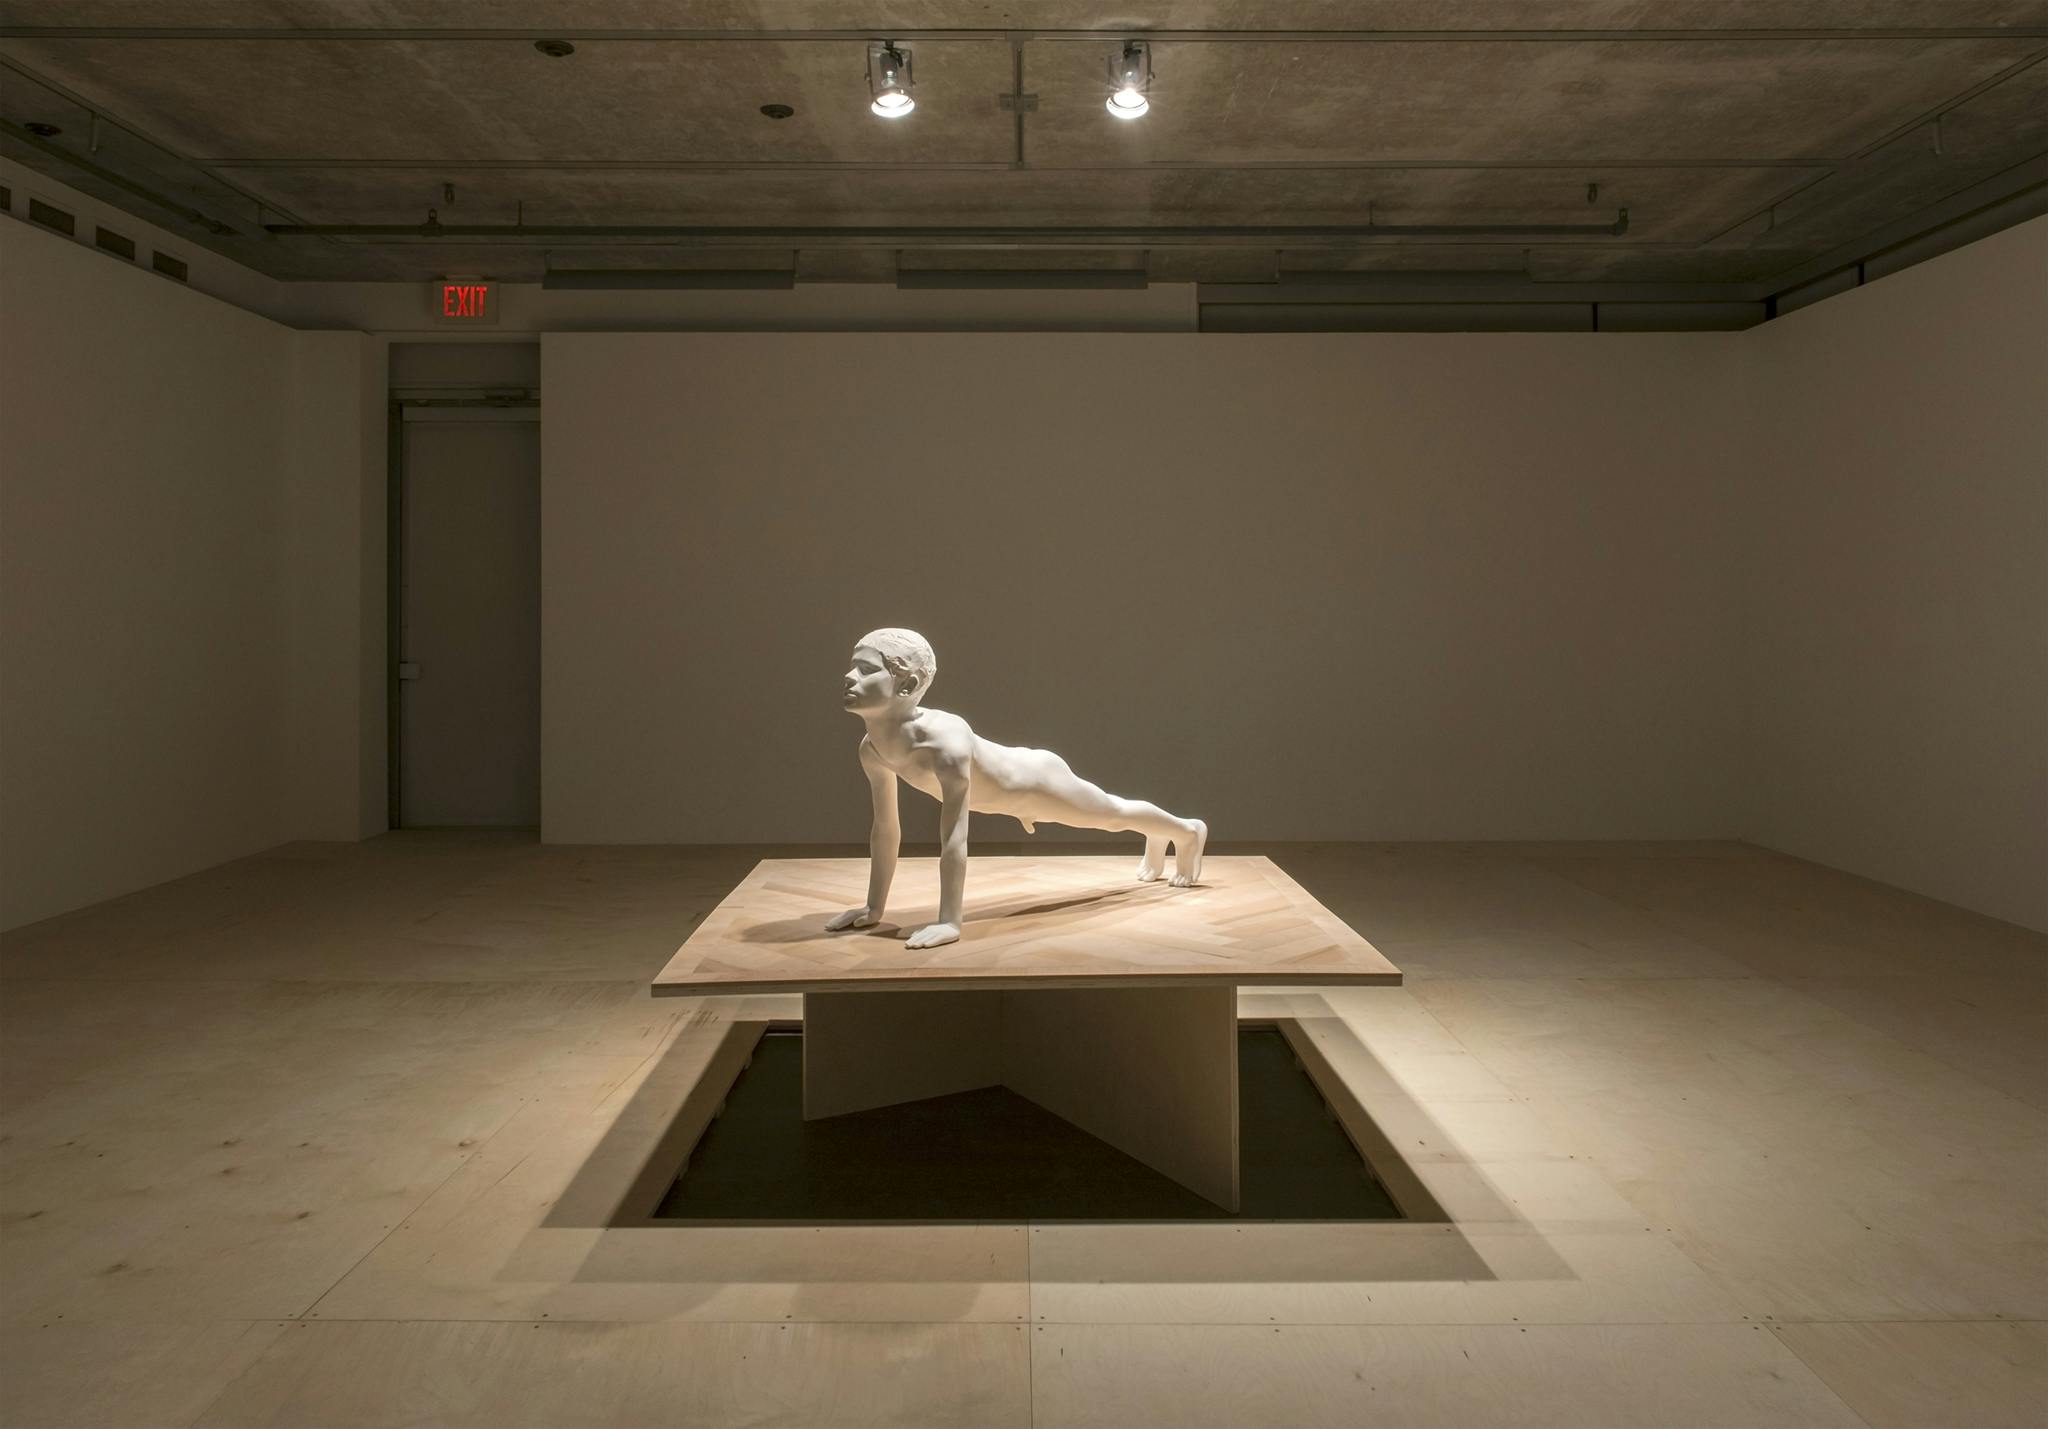 A white sculpture of a male nude in a plank position installed in the middle of a gallery. The sculpture is at human scale and installed atop a wooden plinth. 